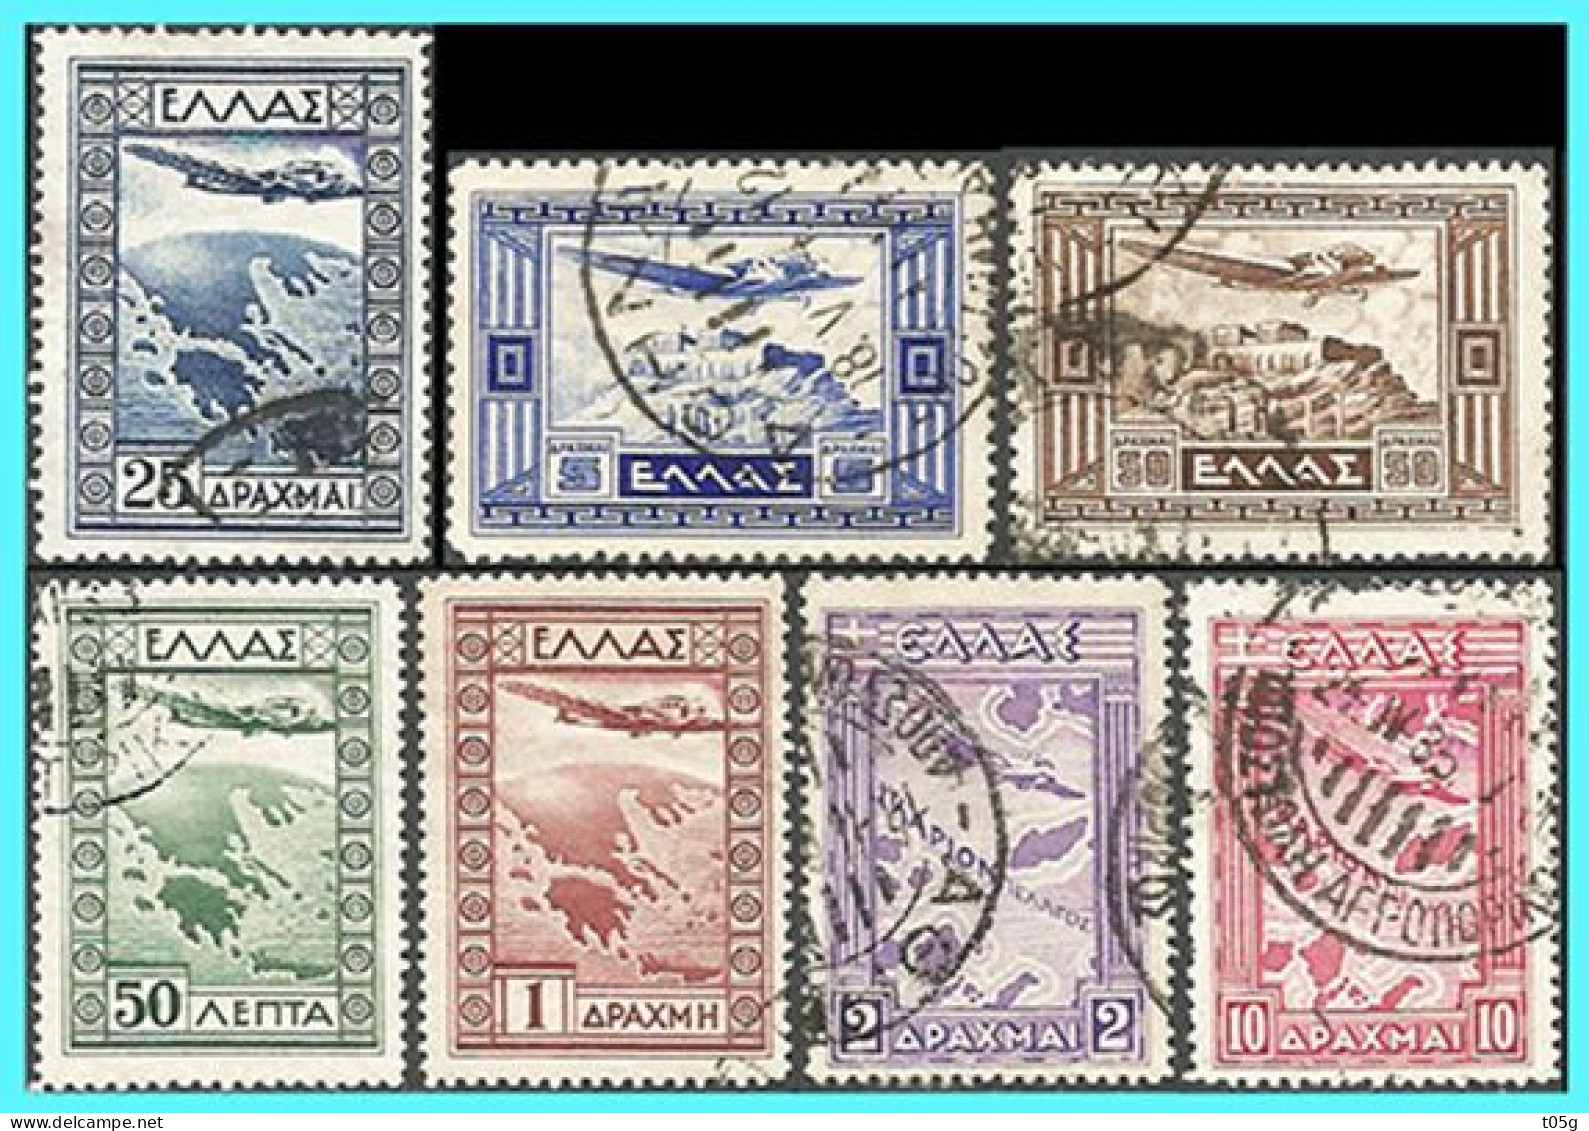 GREECE- GRECE- HELLAS Airpost 1933: “Government” Compl. Set Used - Used Stamps